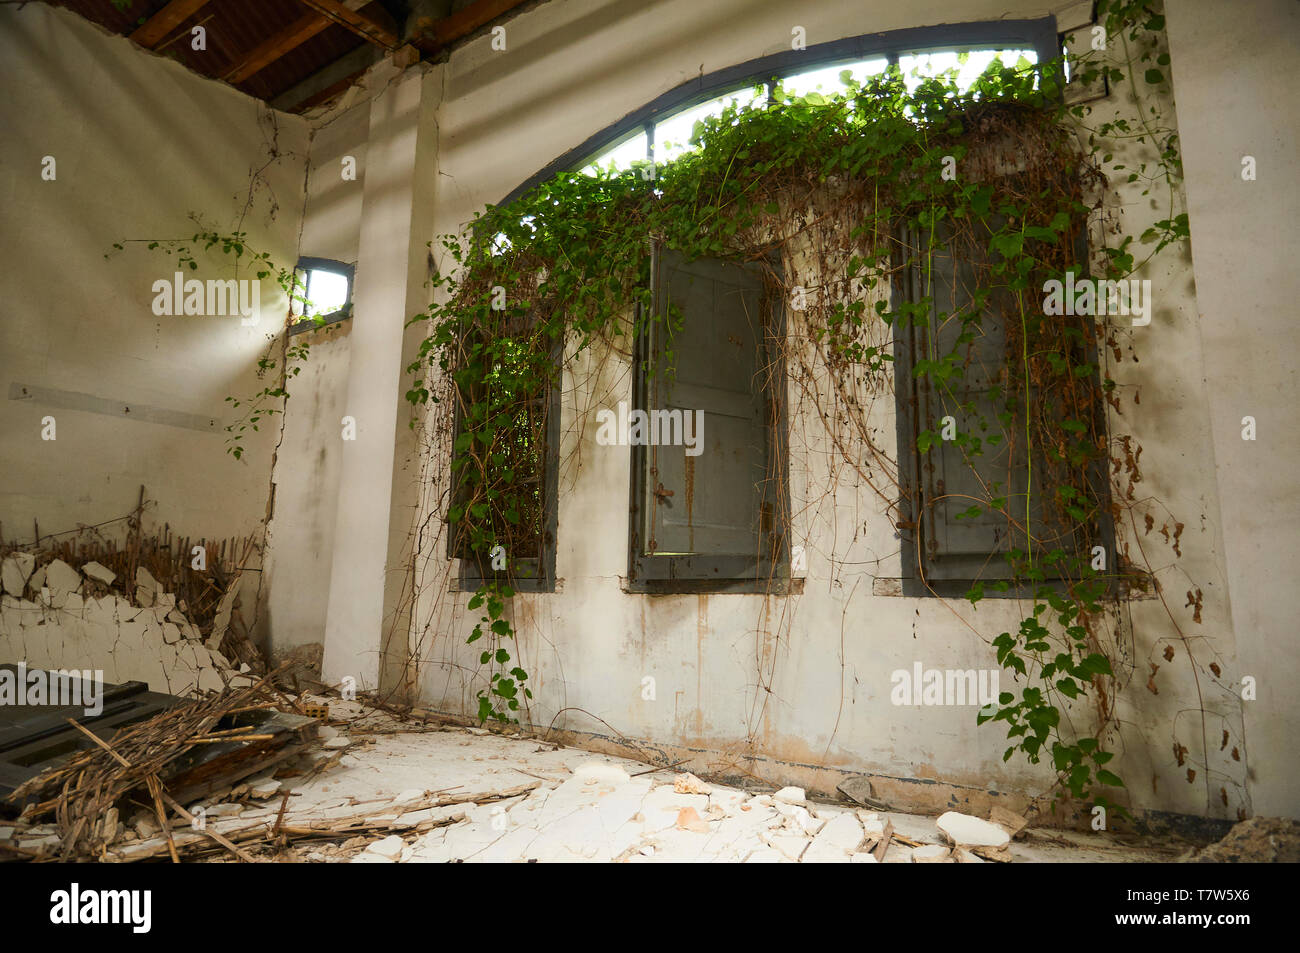 Interior of ruined facilities in the abandoned Canfranc International railway station taken over by plants (Canfranc, Pyrenees, Huesca, Aragon, Spain) Stock Photo